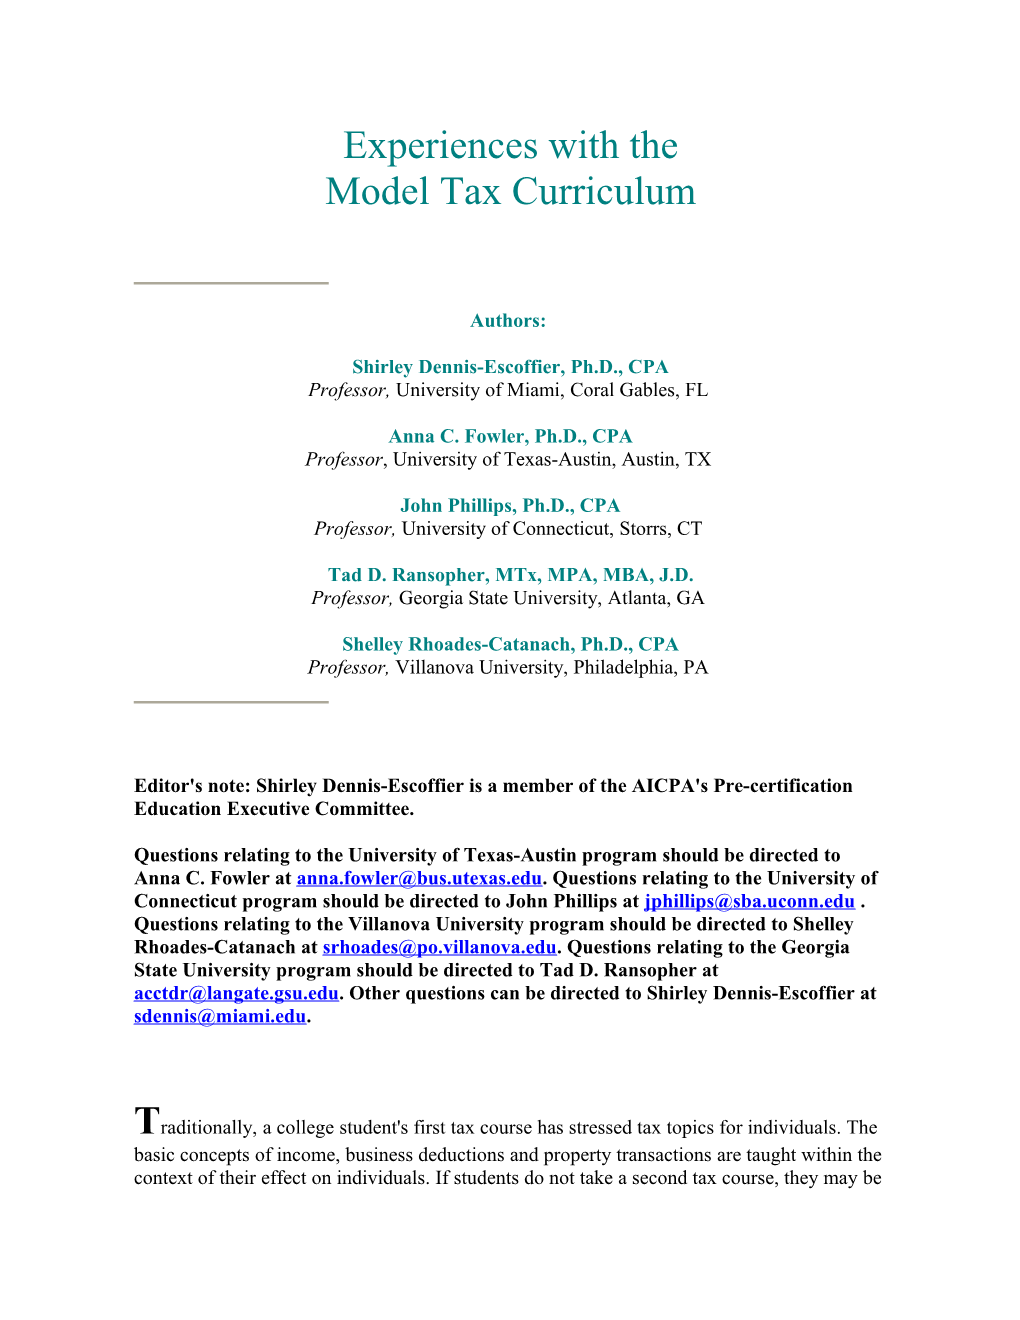 Experiences With The Model Tax Curriculum